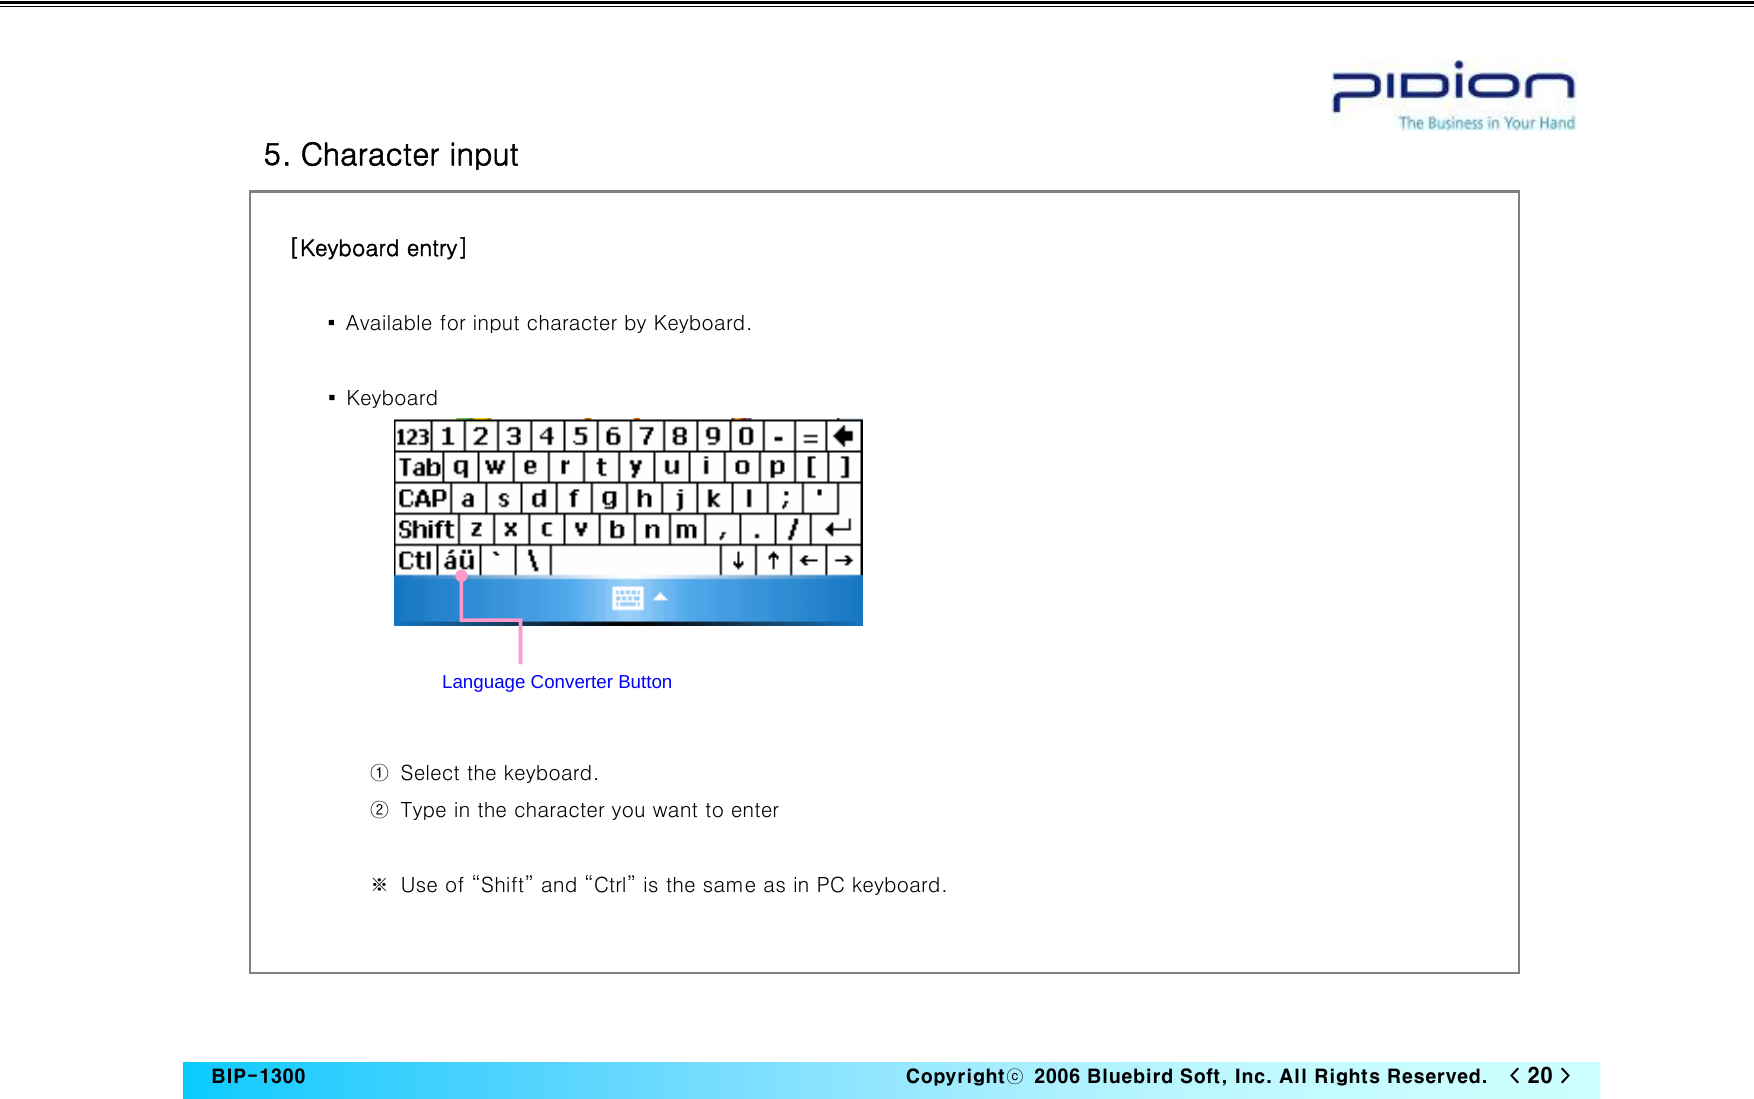   BIP-1300                                                                   Copyrightⓒ  2006 Bluebird Soft, Inc. All Rights Reserved.   &lt; 20 &gt;    5. Character input  [Keyboard entry]  ▪  Available for input character by Keyboard.  ▪  Keyboard           ①  Select the keyboard. ②  Type in the character you want to enter  ※  Use of “Shift” and “Ctrl” is the same as in PC keyboard.   Language Converter Button 